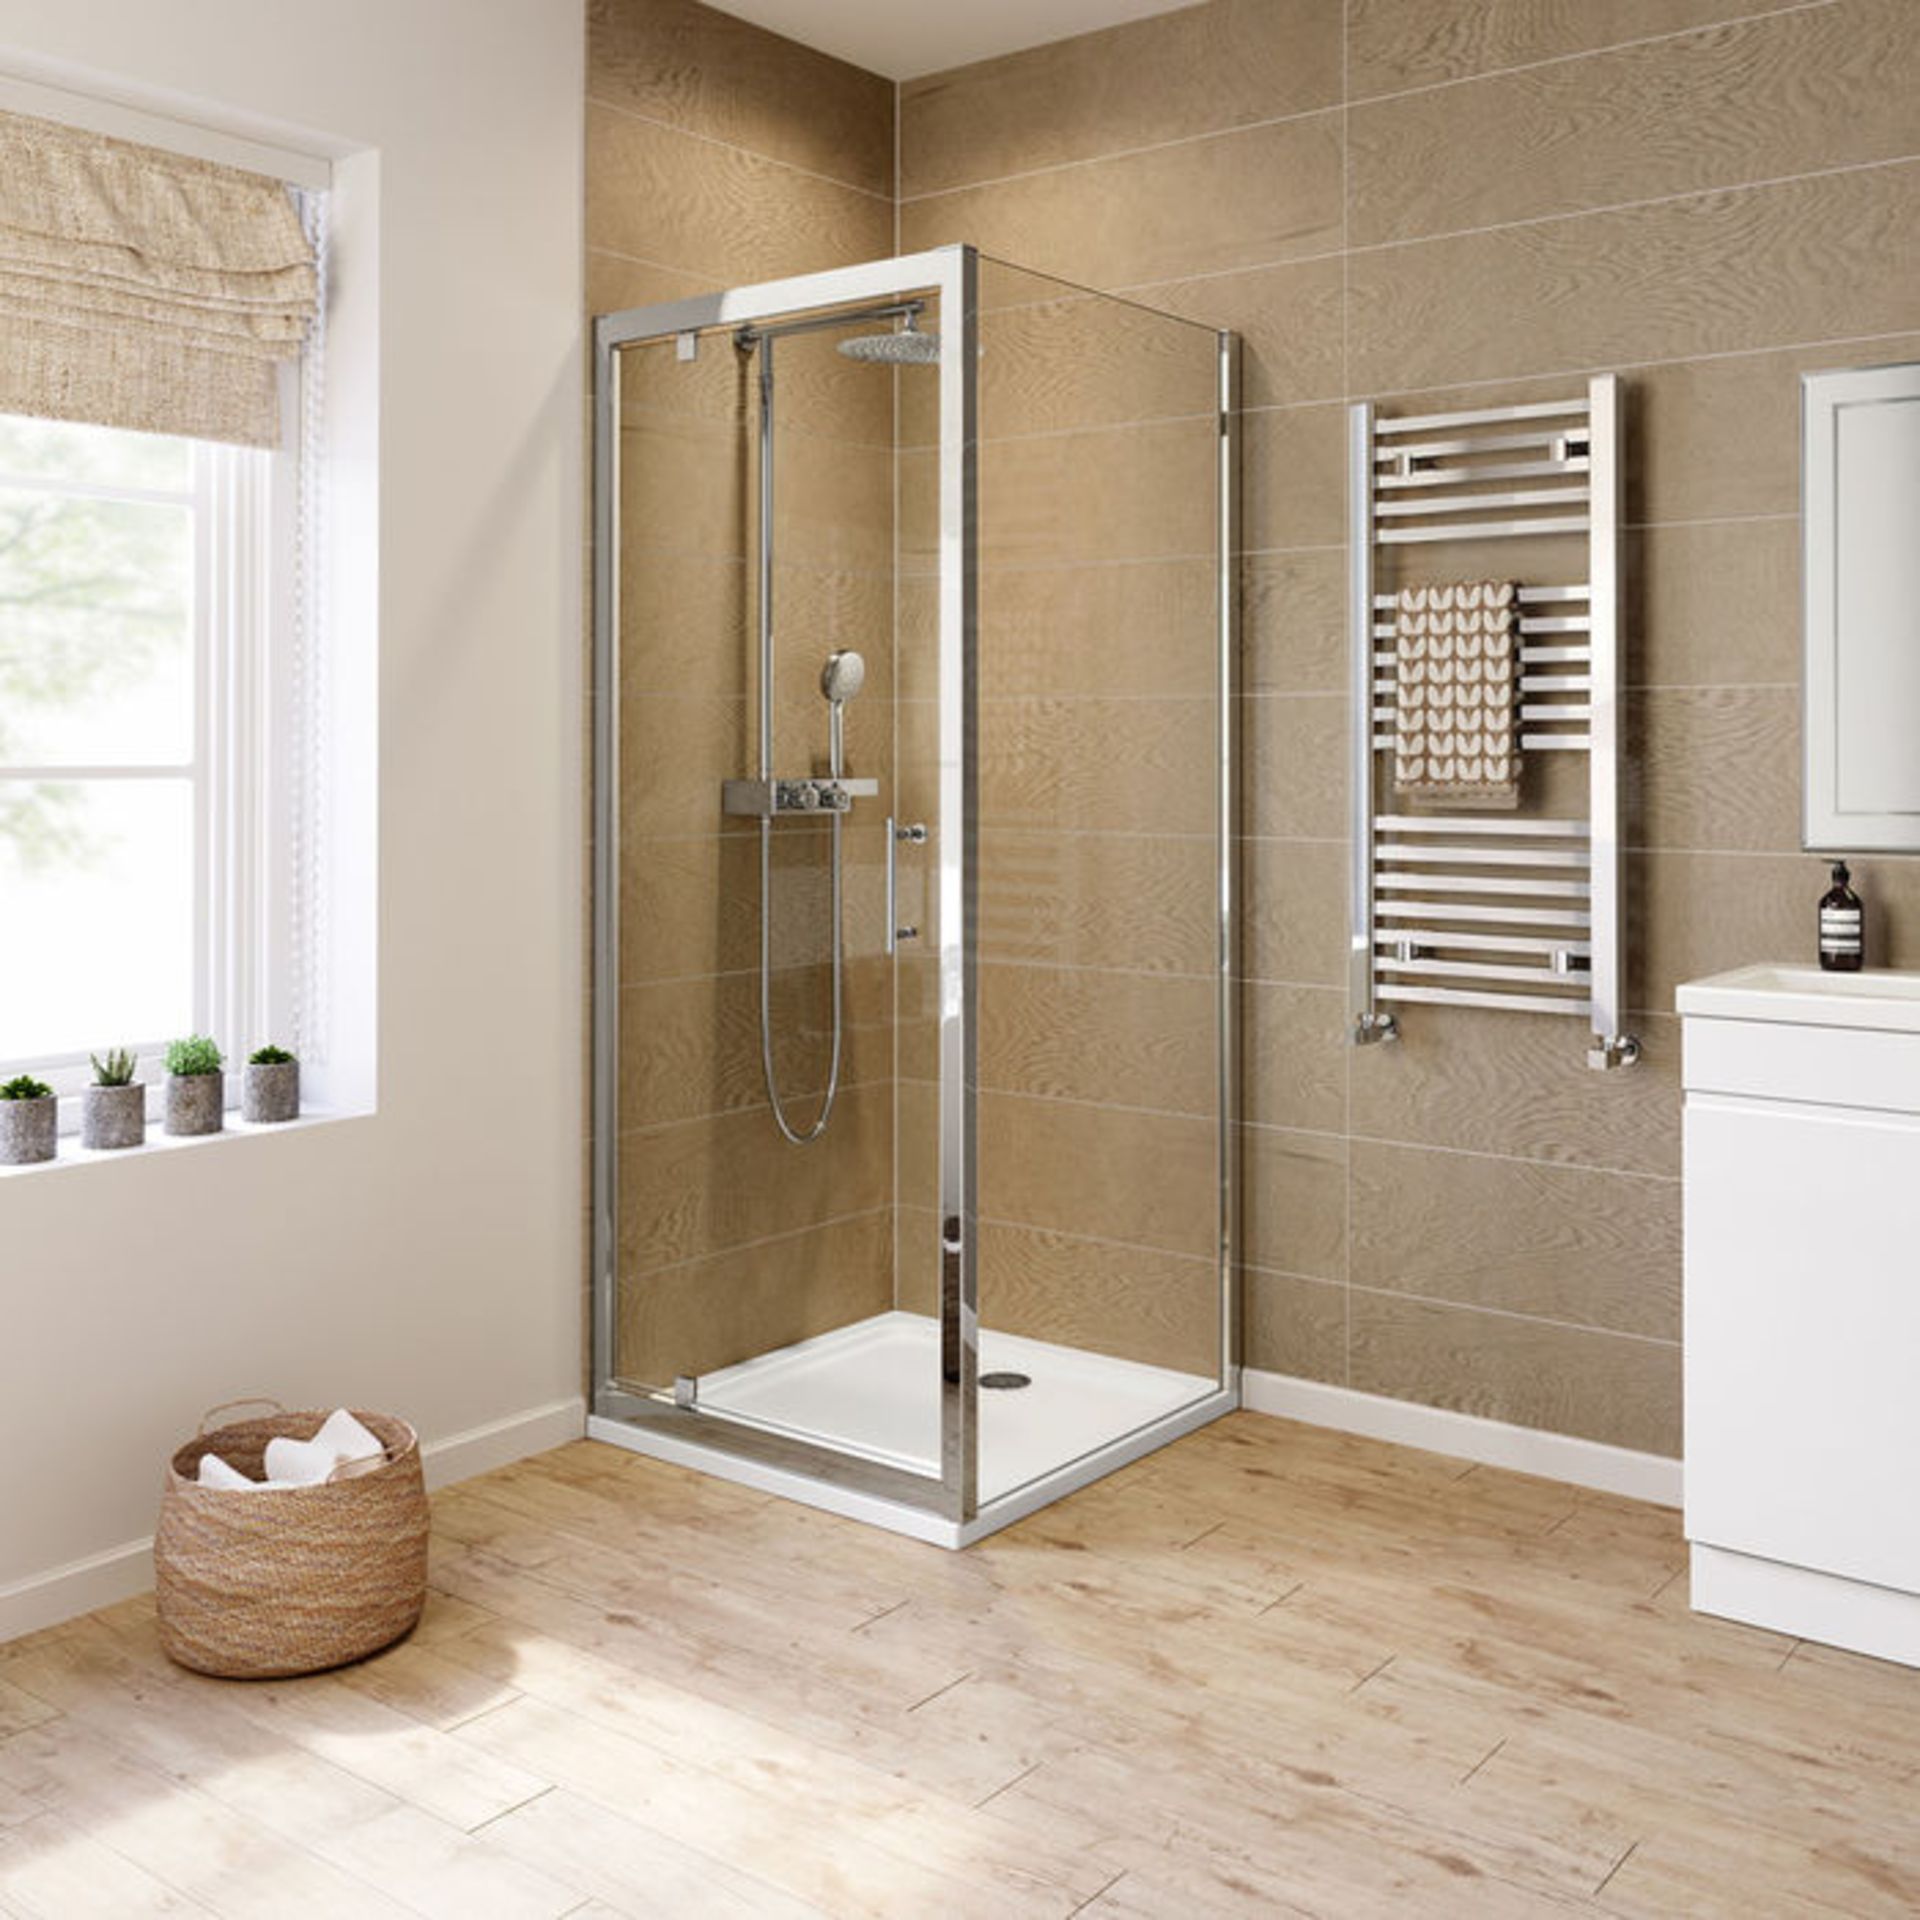 (DK46) 900x760mm - 6mm - Elements Pivot Door Shower Enclosure. RRP £307.99. 6mm Safety Glass Fully - Image 3 of 4